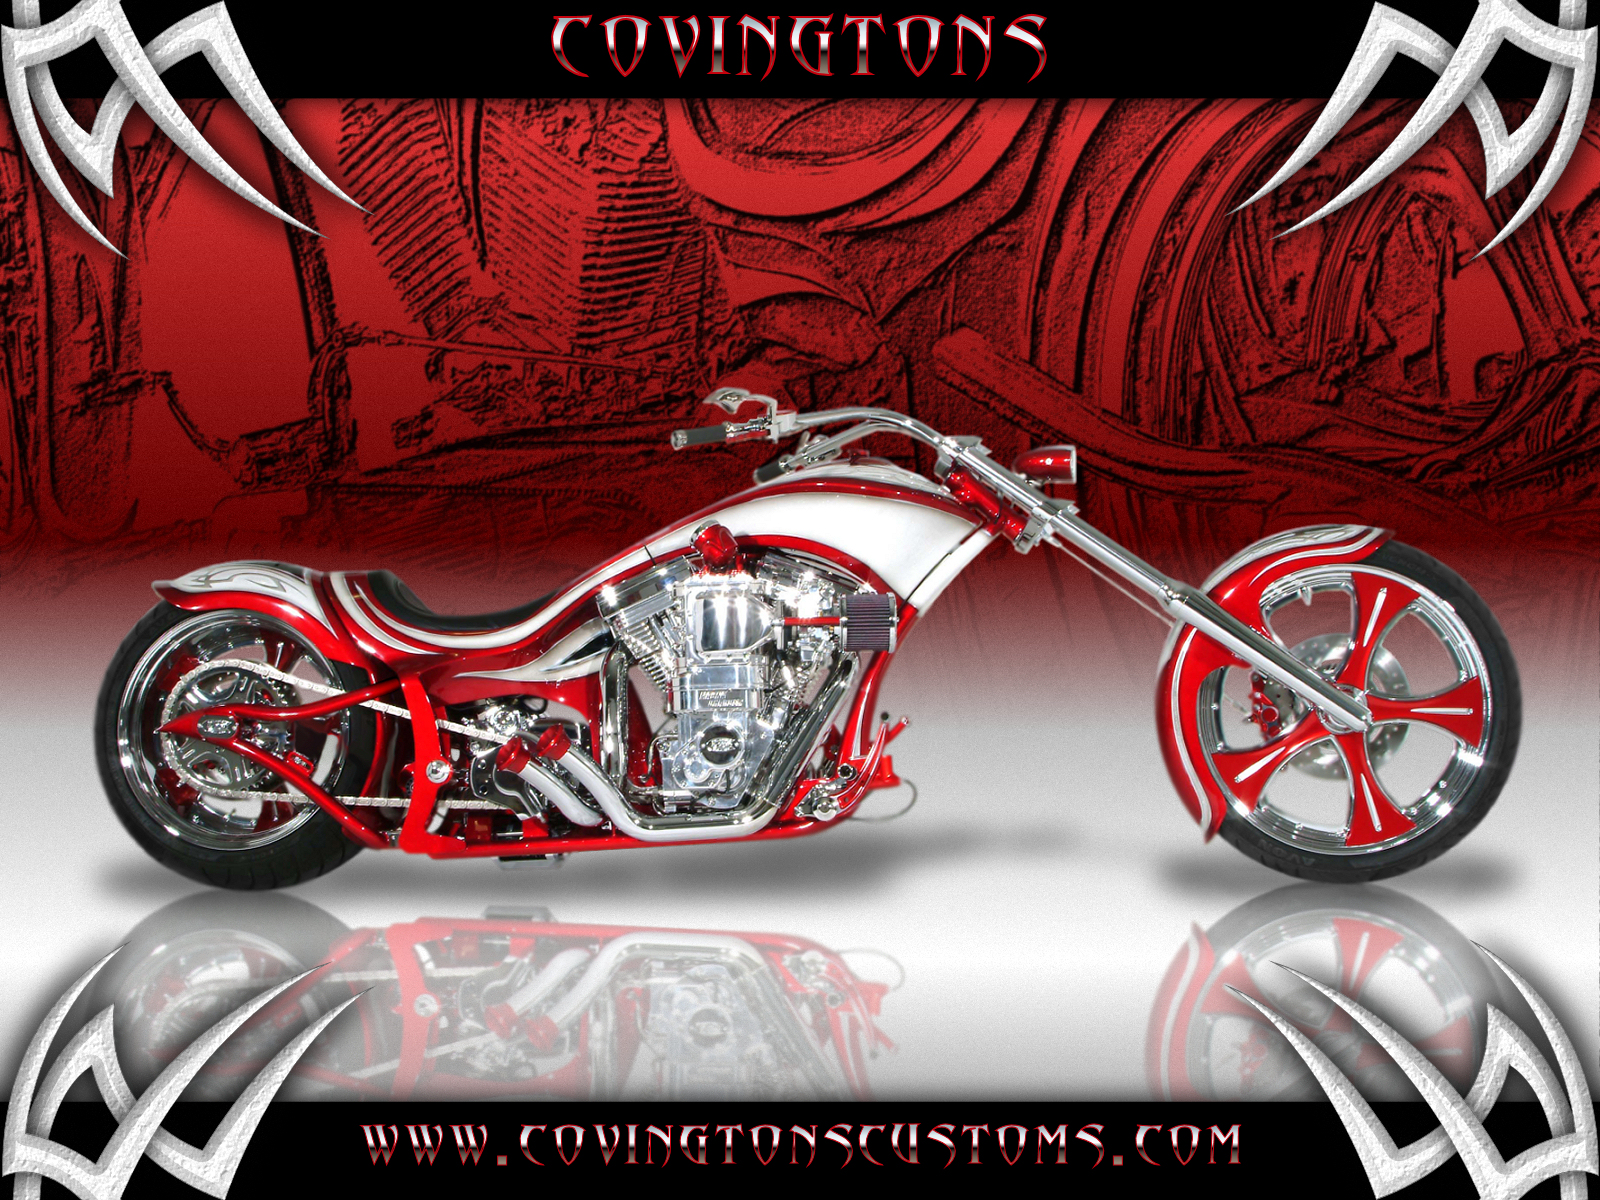 Bikes For Sale Custom Motorcycles Cars Links Events Contact